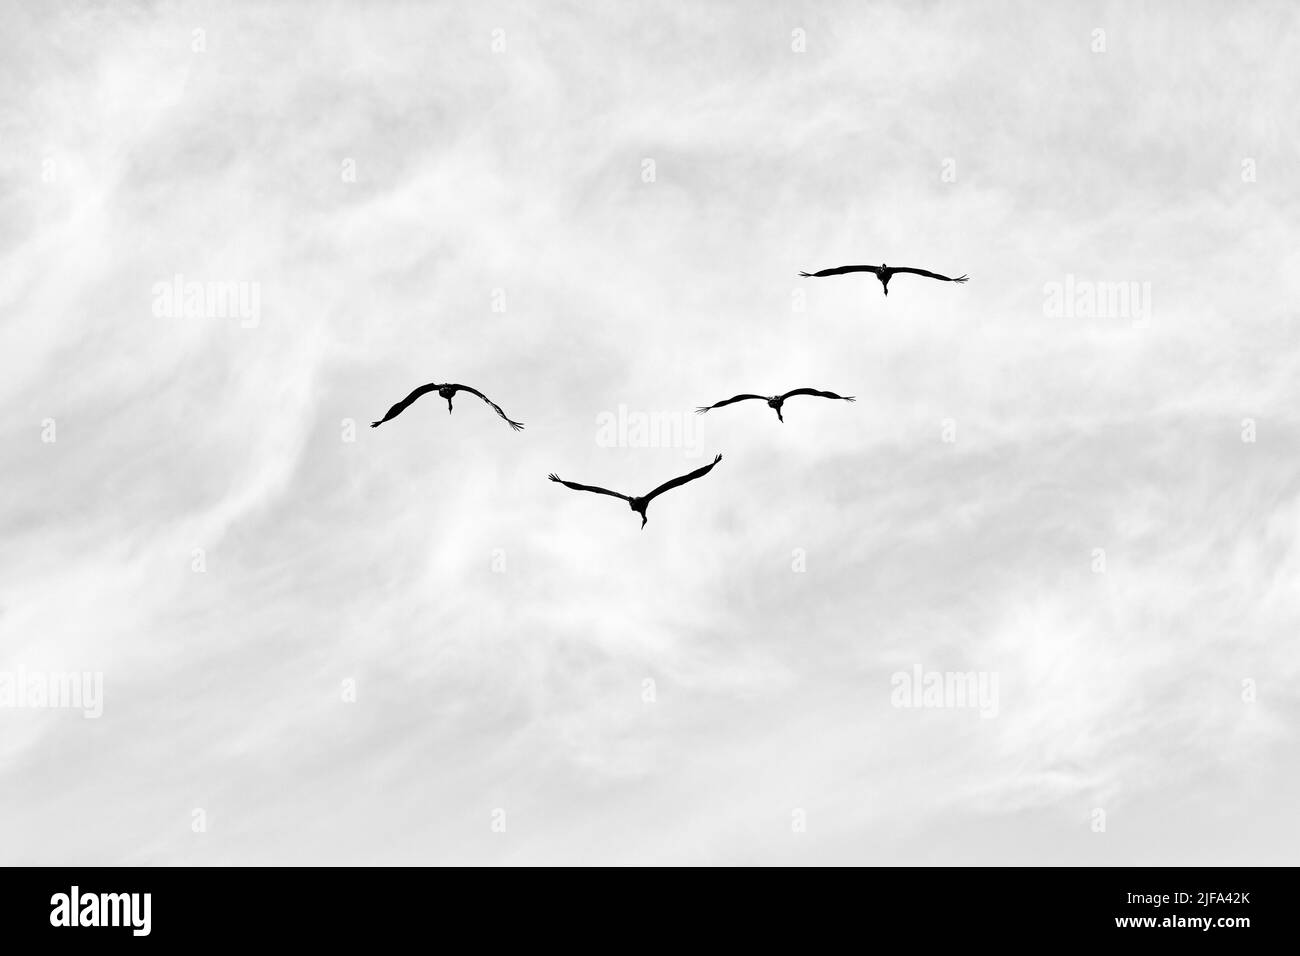 Four flying common cranes (Grus grus), bird migration, silhouettes in a slightly cloudy sky, text free space, black and white photo, Gotland Island Stock Photo